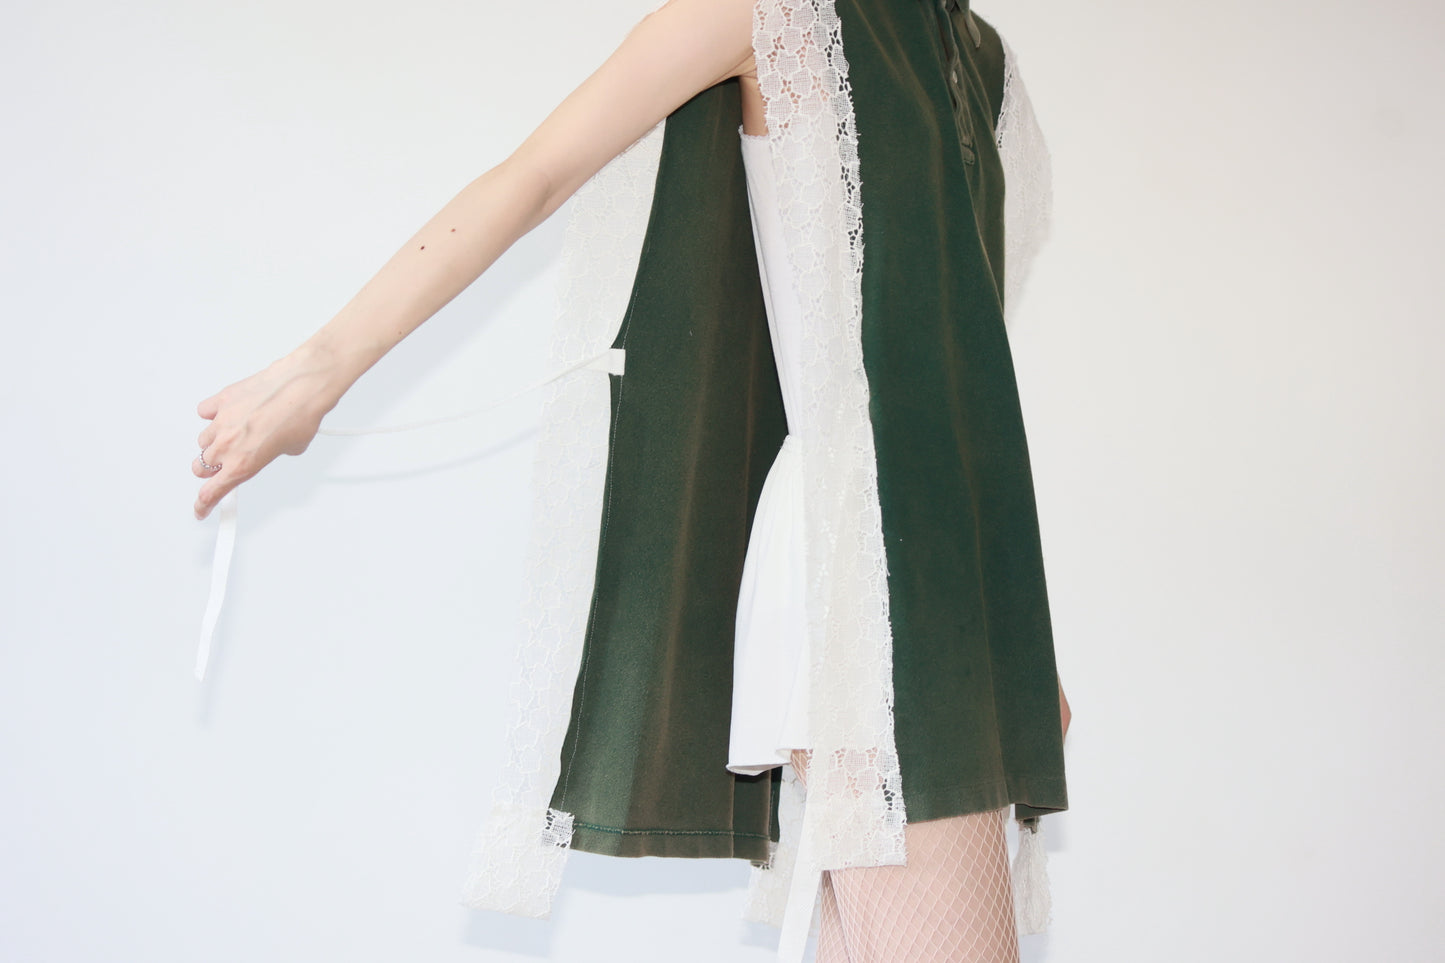 POTTOxUDW UP-CYCLED E-FLOW BLEACHED GILET, MOSS-GREEN, LACE